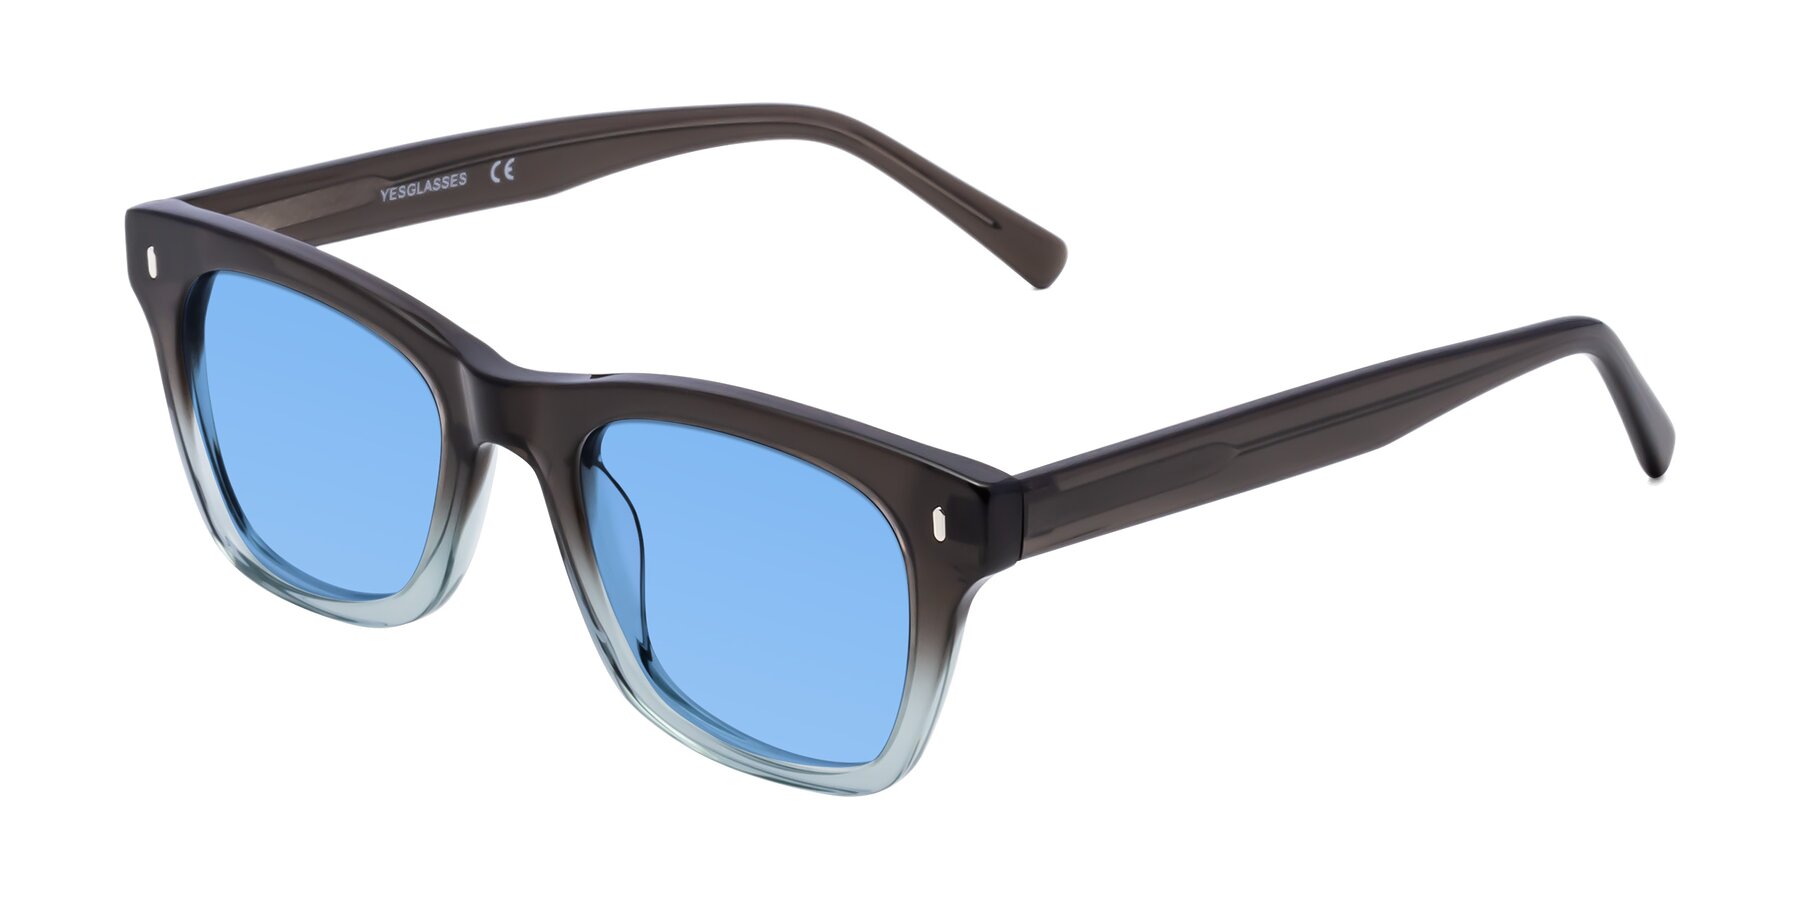 Angle of 17329 in Dark Brown with Medium Blue Tinted Lenses